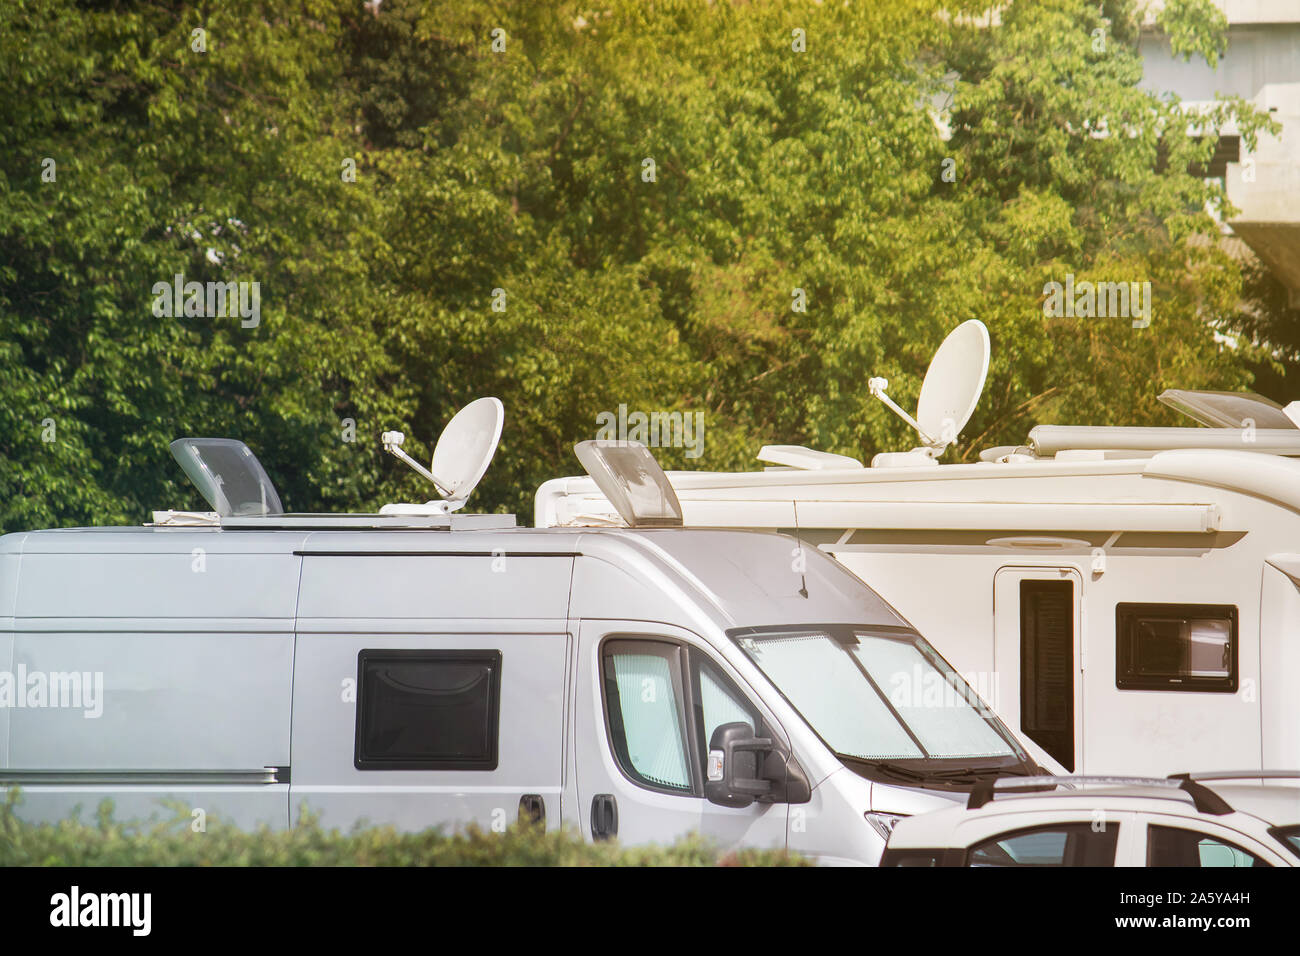 Satellite dishes on caravans. Electronic equipment on vans and campers for receiving video signals (copy space on the top of the image) Stock Photo